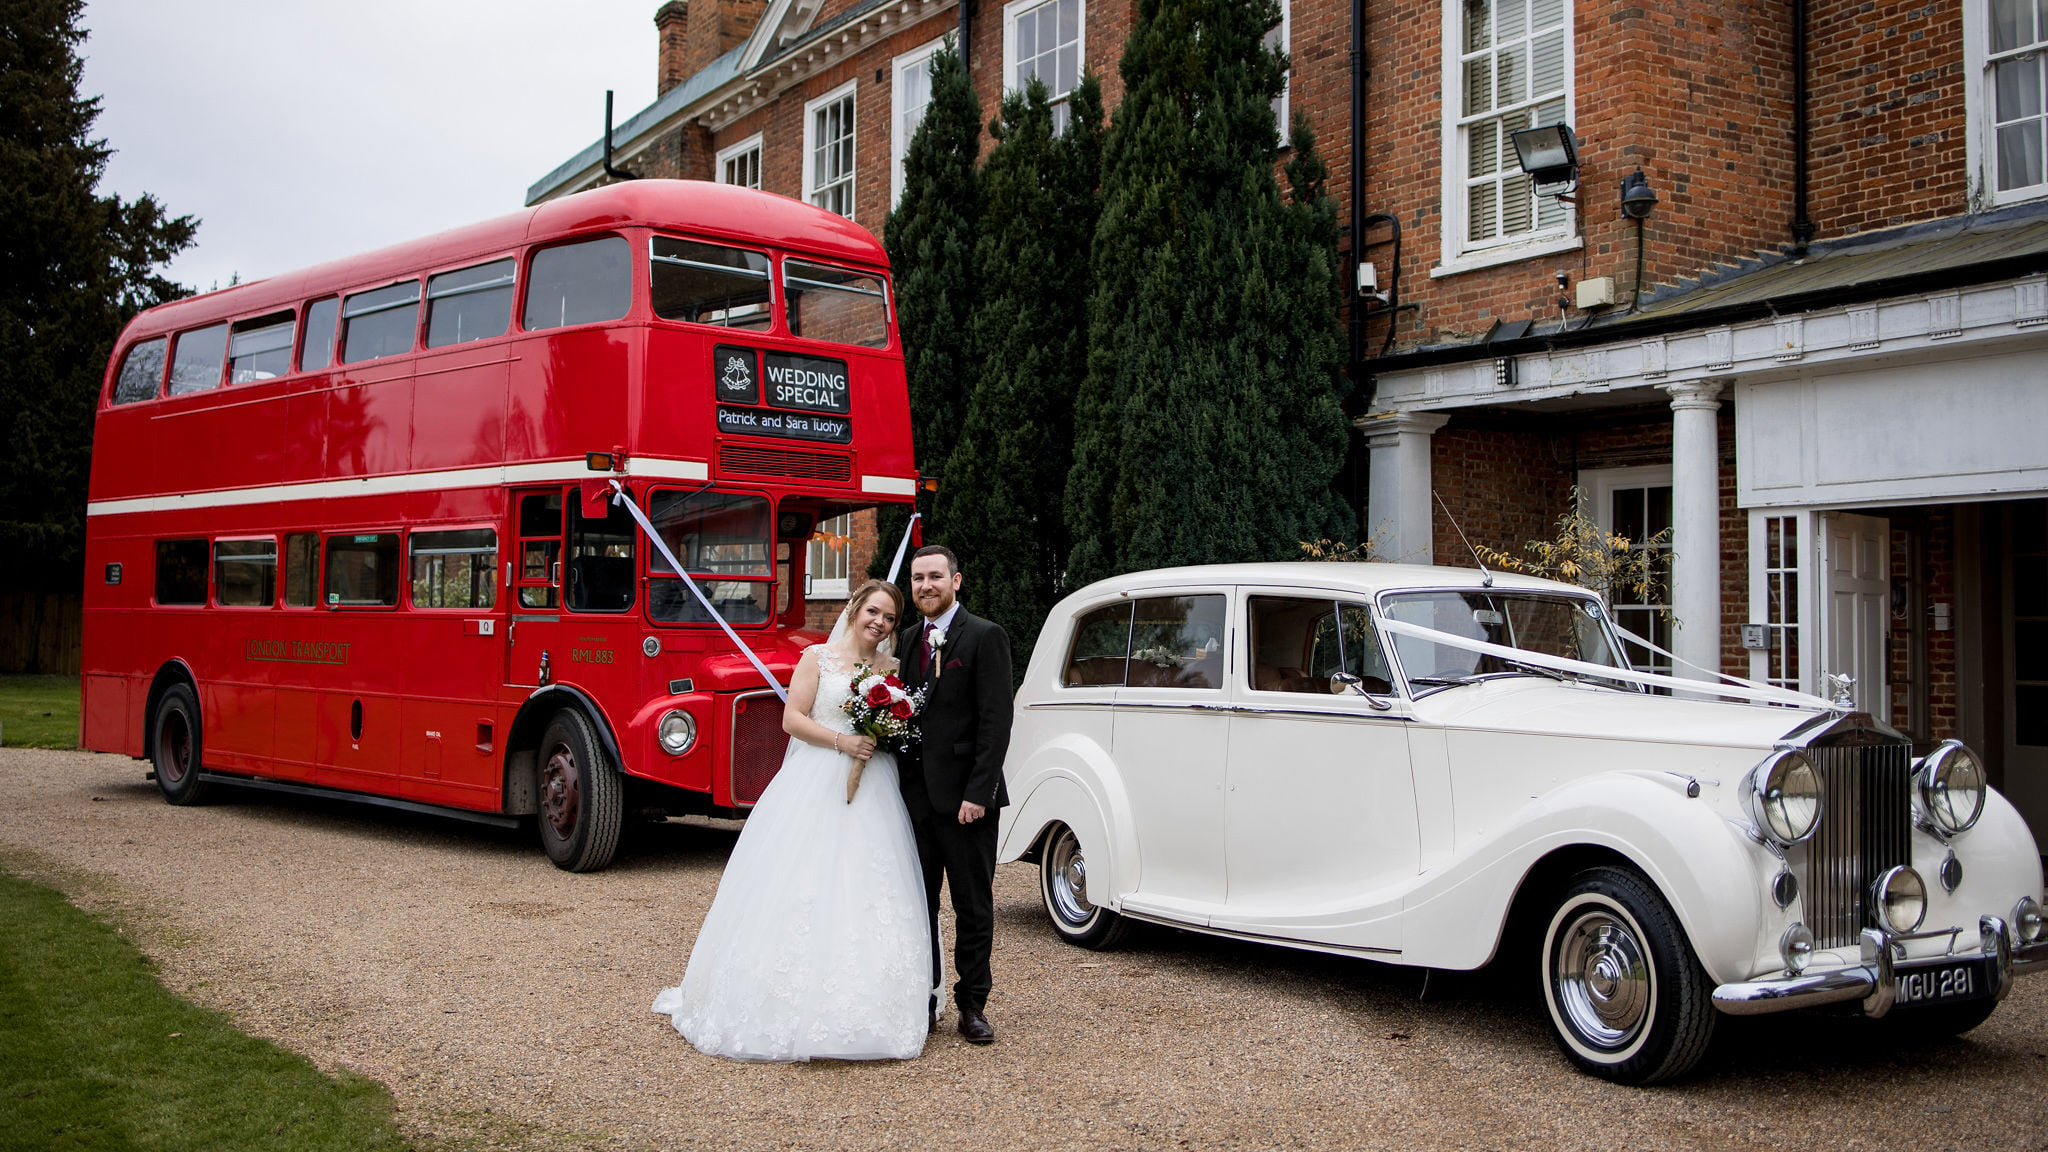 Classic Rolls-Royce followed by a large double decker red bus in front of a wedding venue in Walton-on-Thames